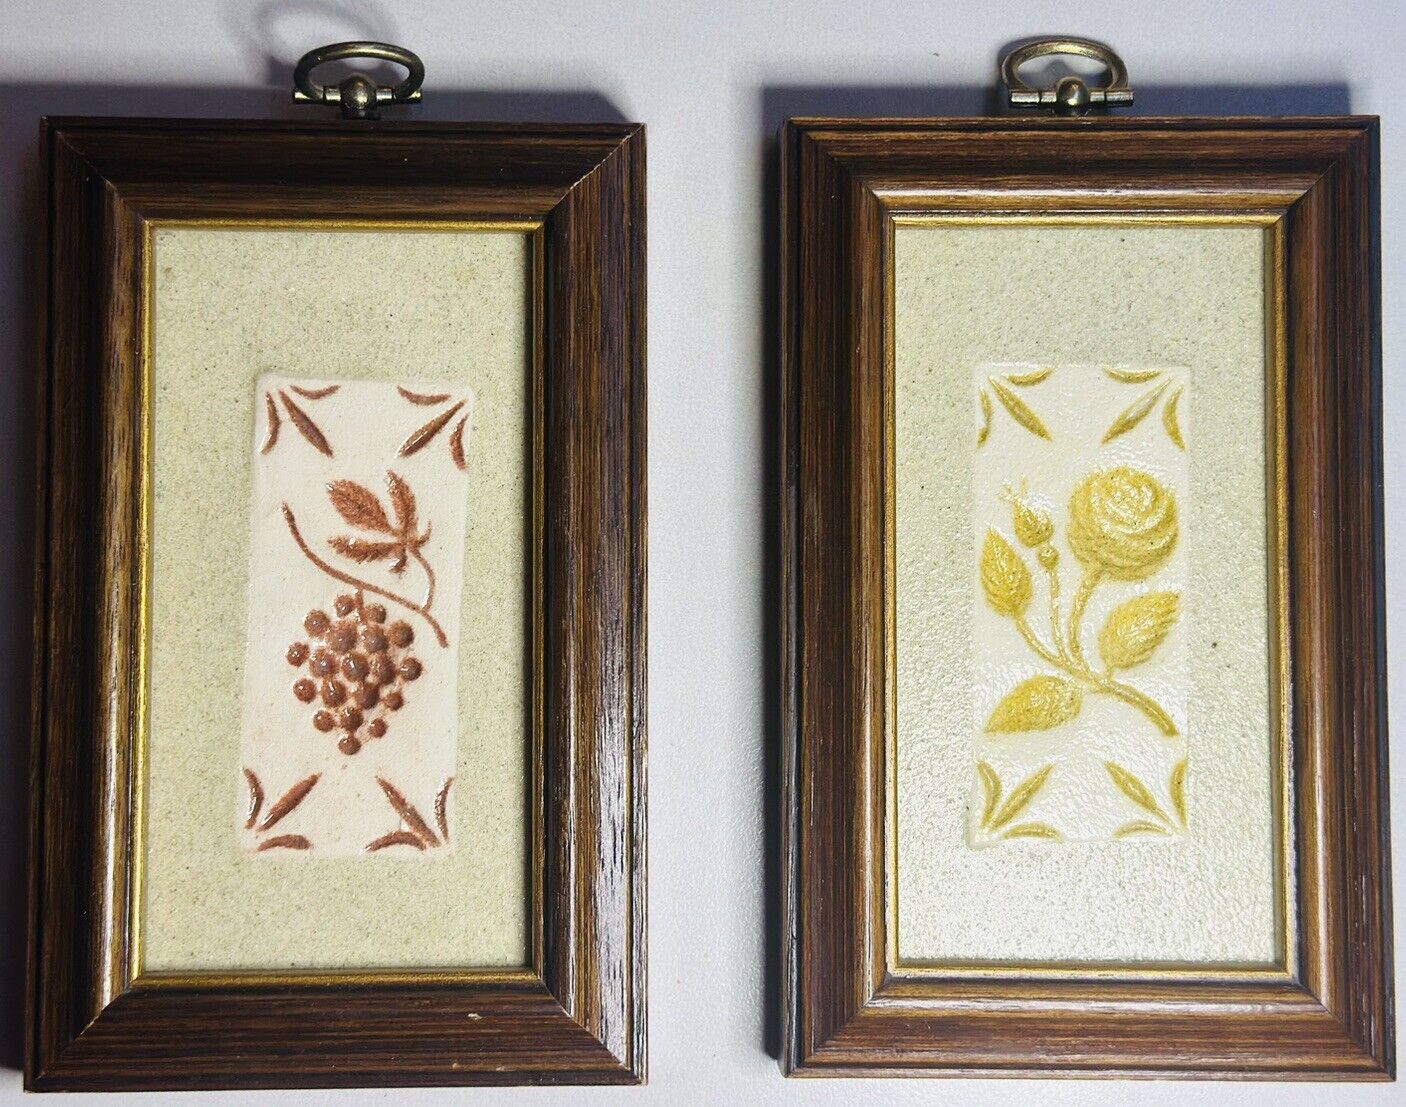 vtg butter mold wall plaques old buttermould pattern products Littlestown , PA